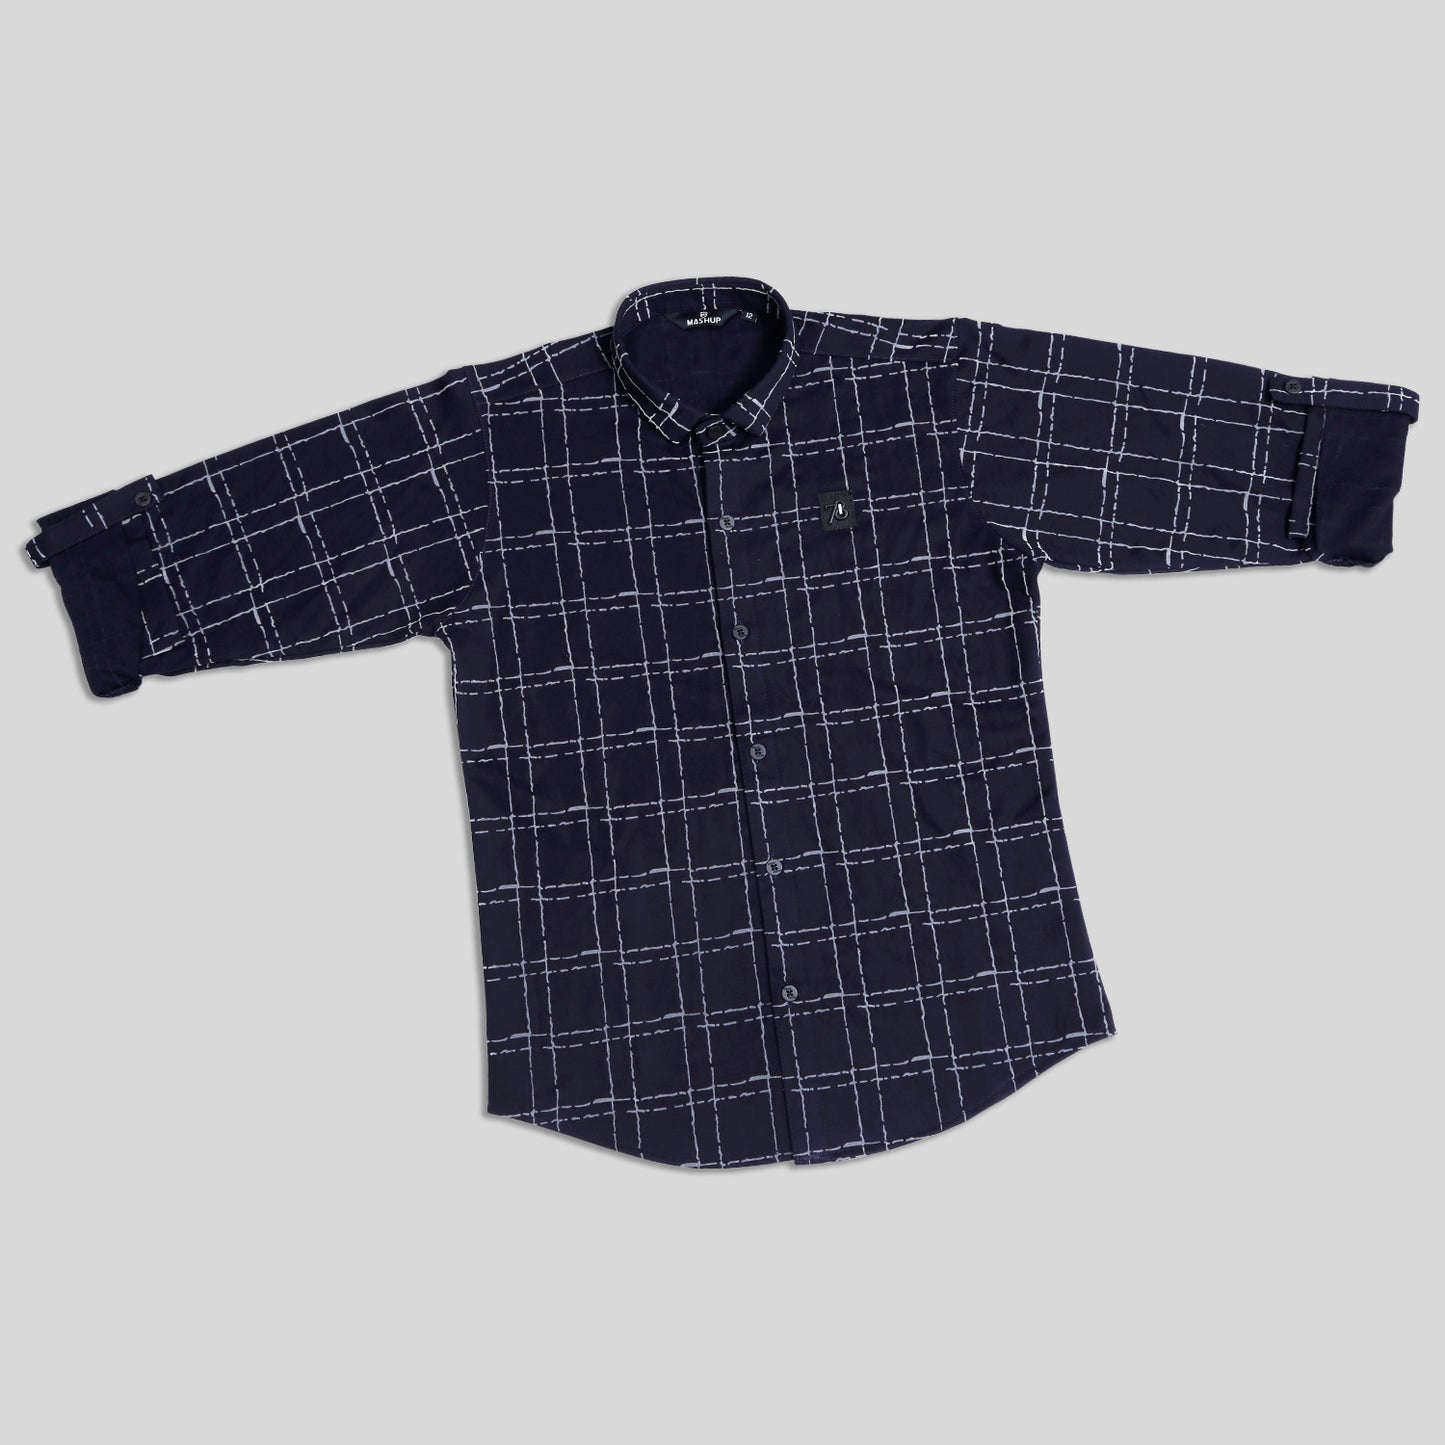 Checkmate Boredom: Elevate Casual Fun with This Unique Checked Shirt!